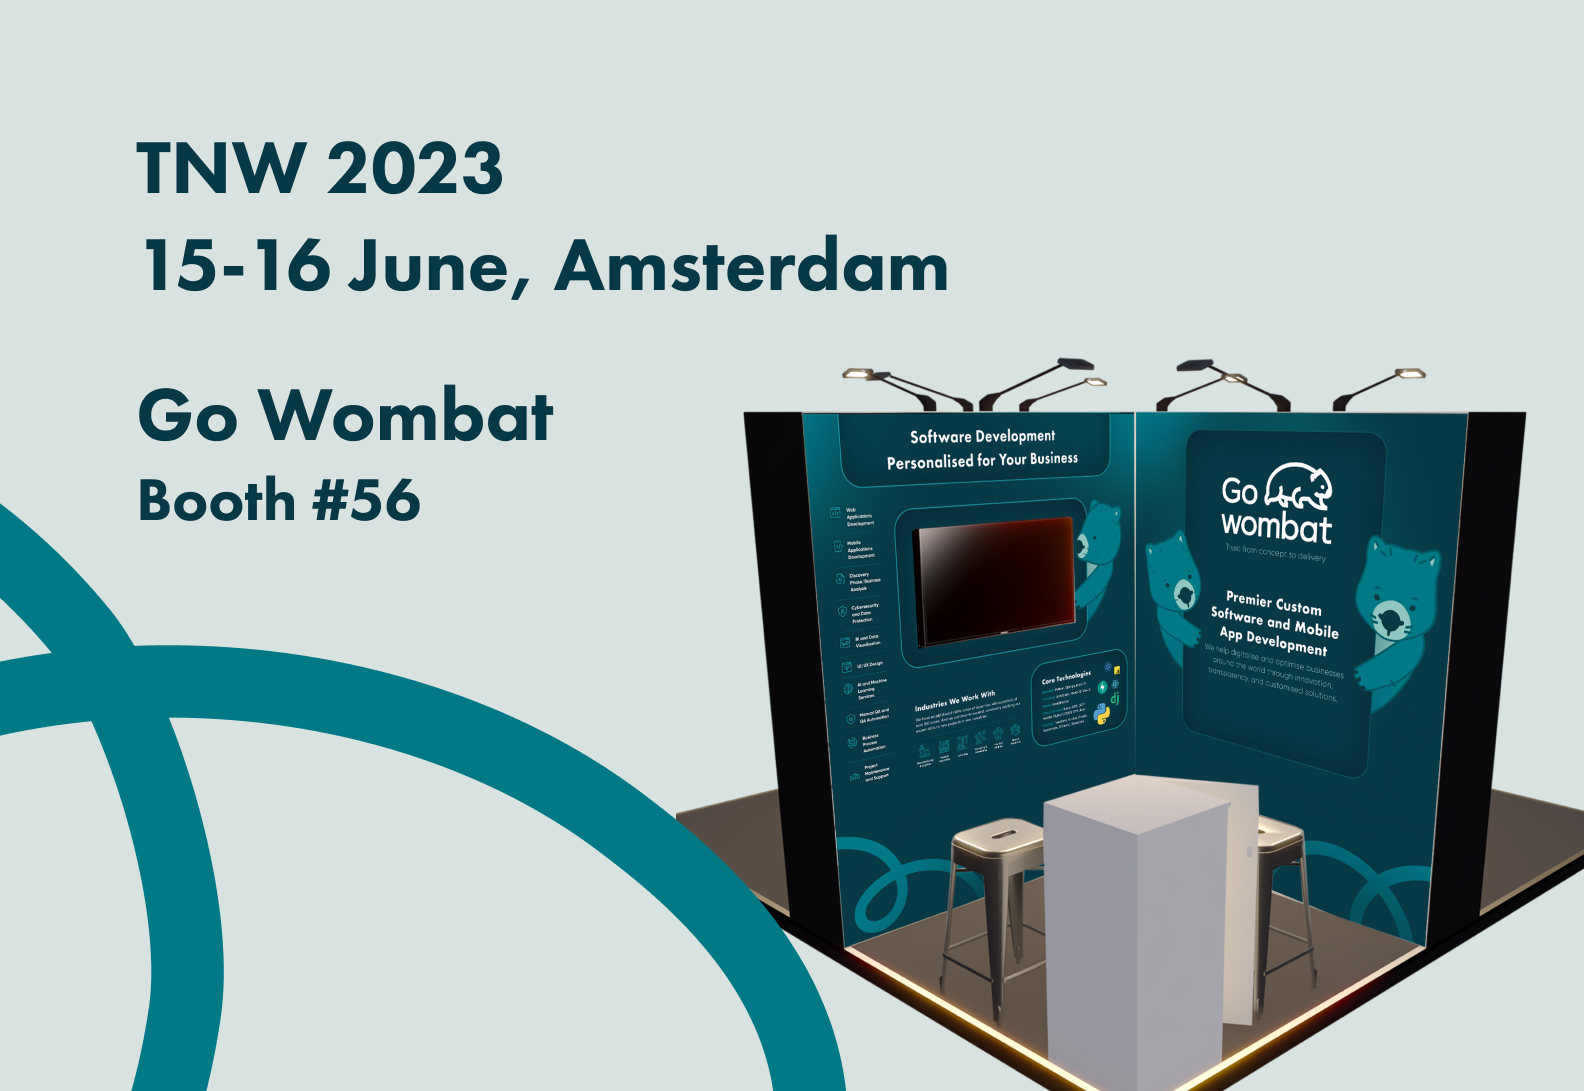 You can meet Go Wombat at booth #56 at TNW 2023 in Amsterdam. We will be there on 15-16 June.